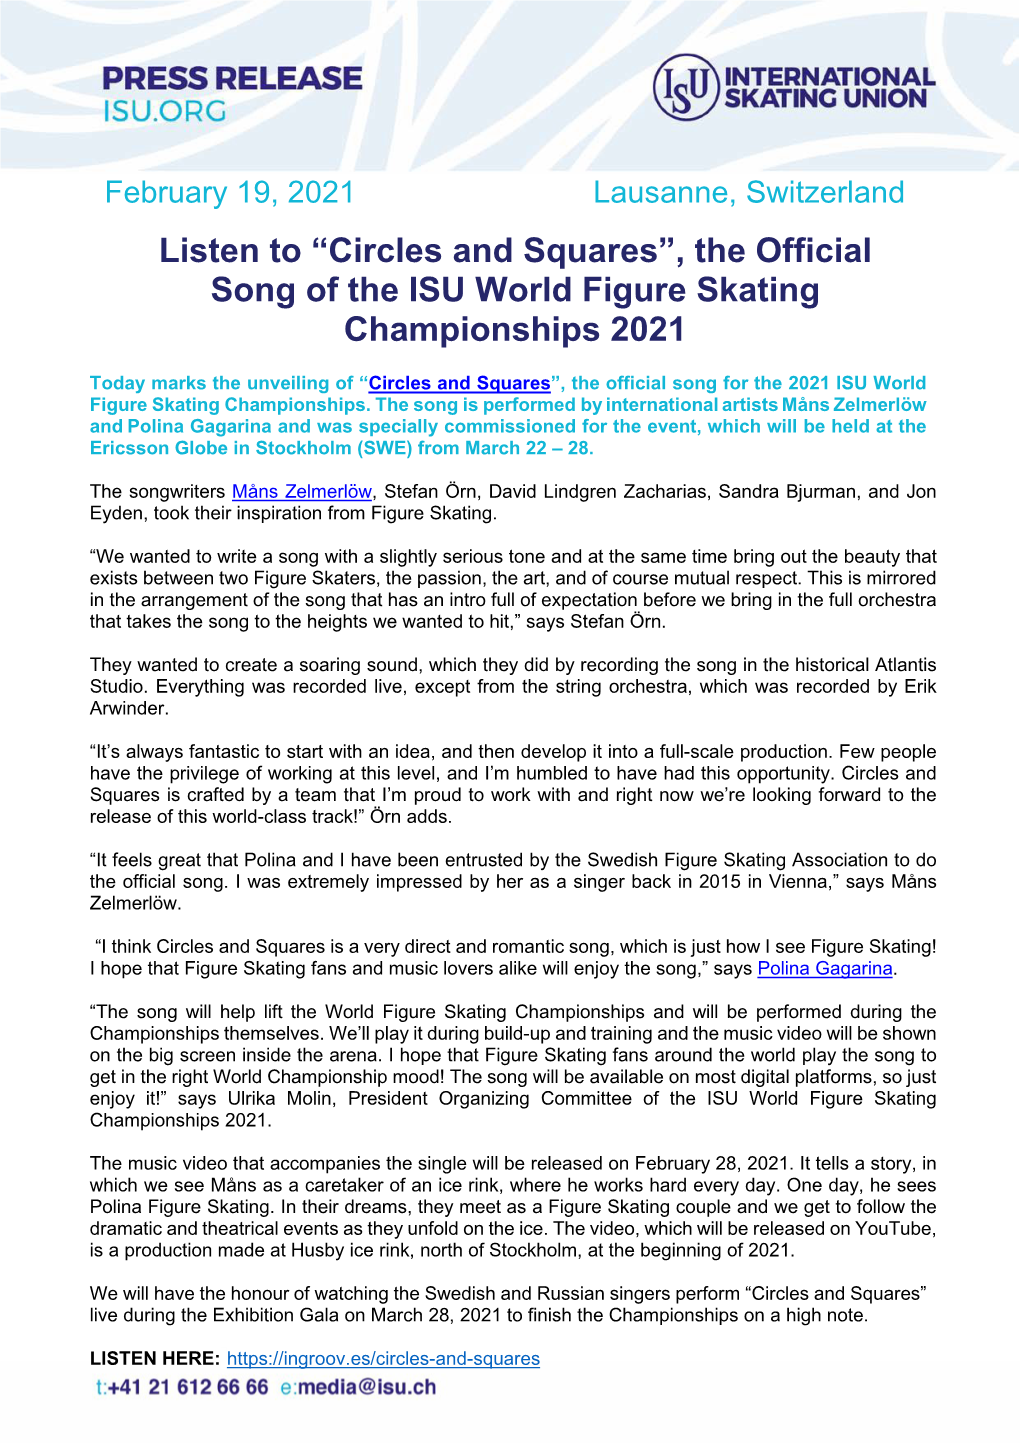 Listen to “Circles and Squares”, the Official Song of the ISU World Figure Skating Championships 2021